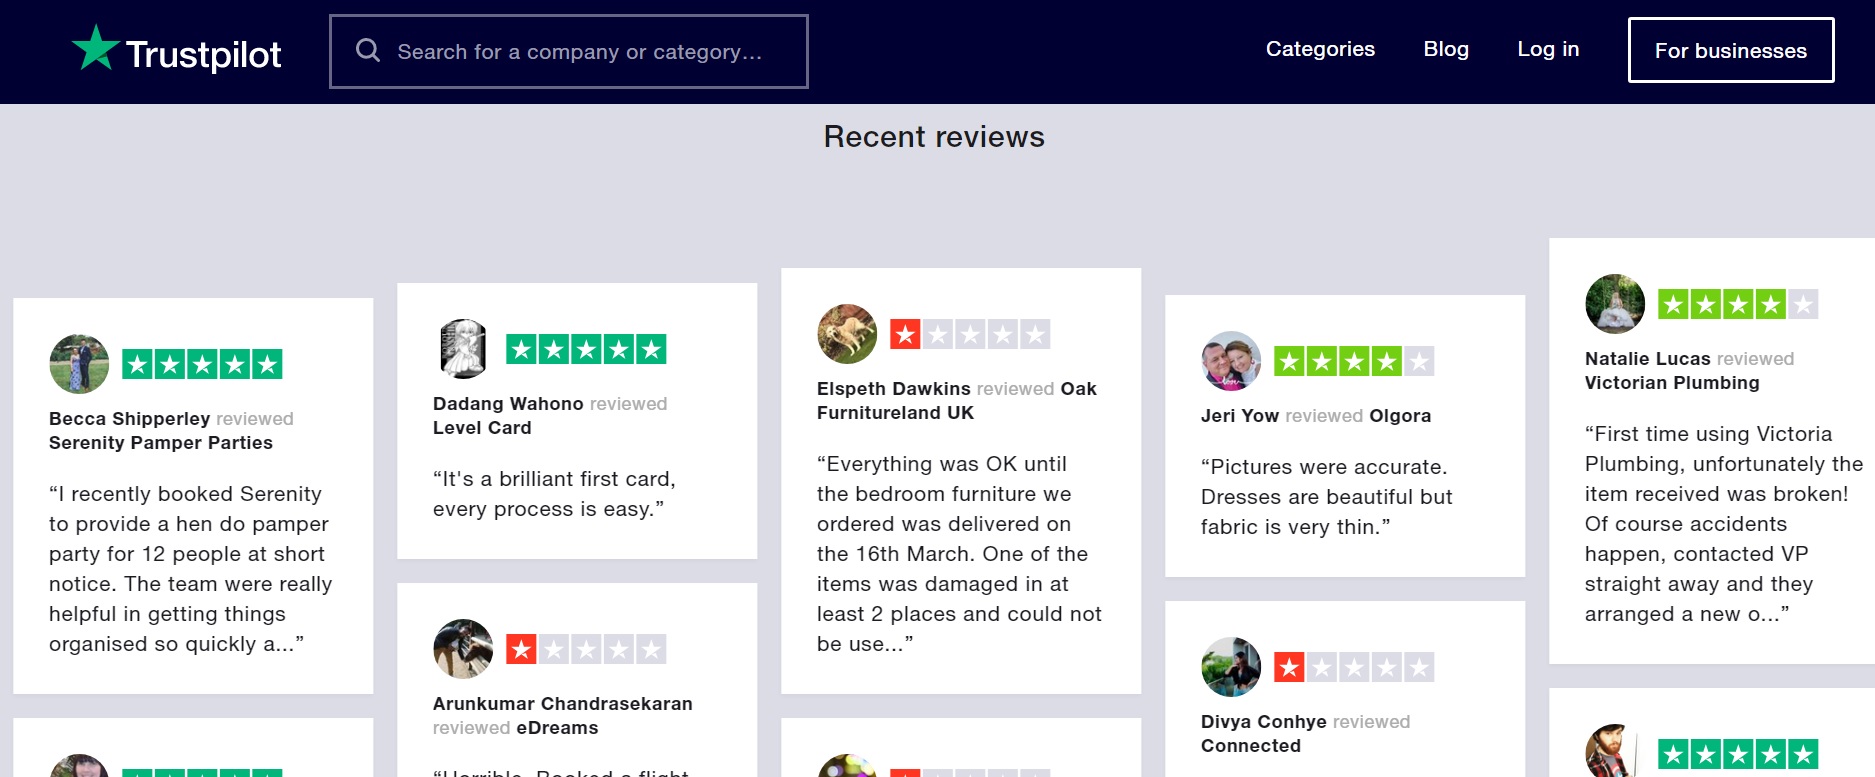 Some retailers have staff dedicated to responding to Trustpilot reviews